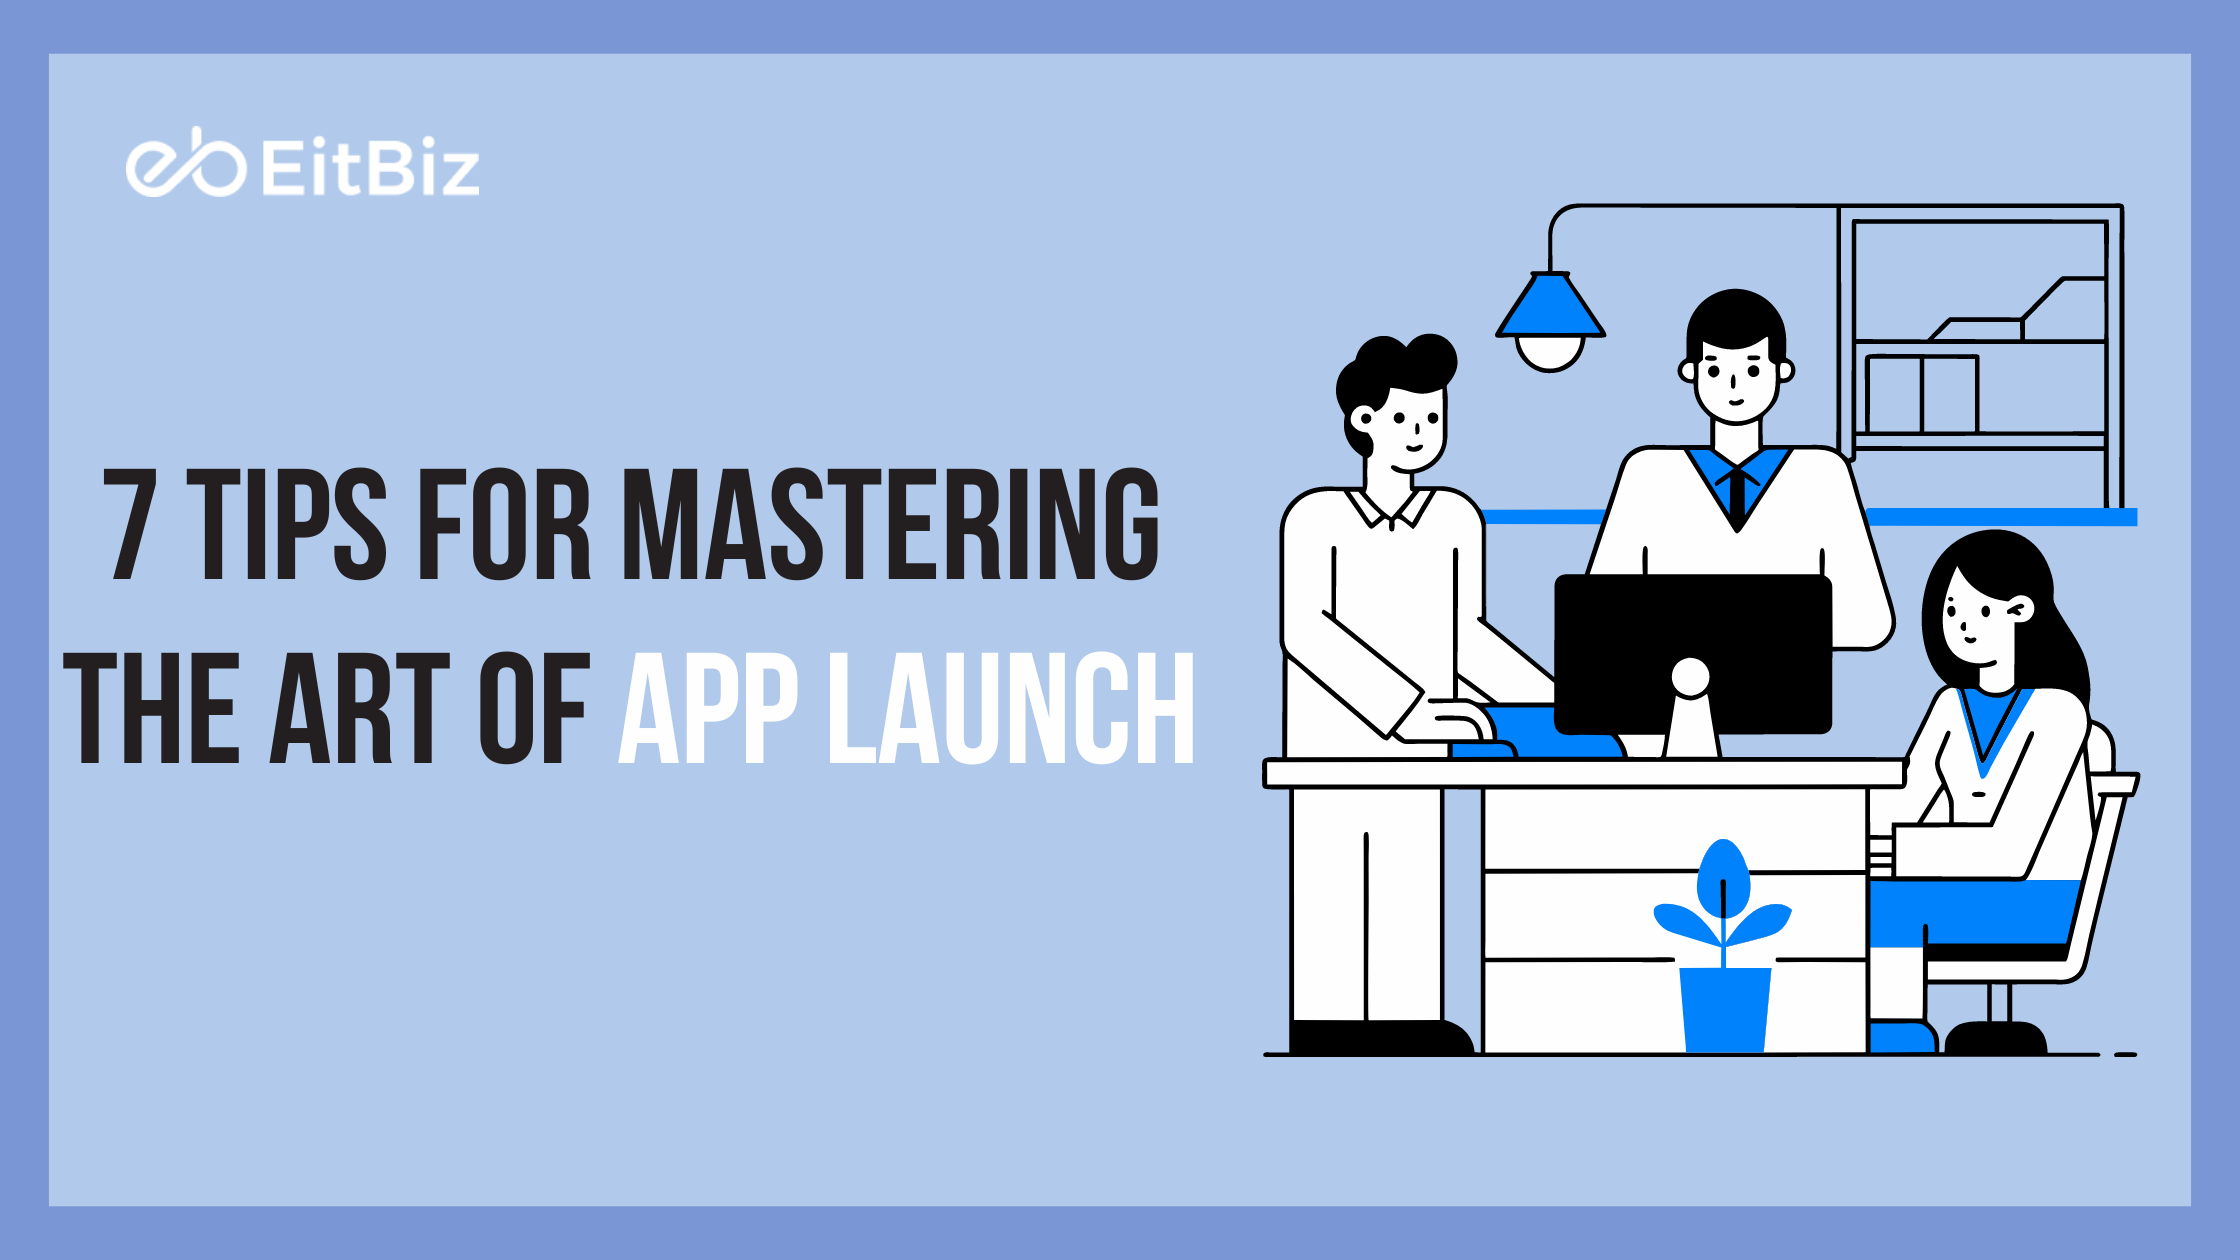 7 Tips for Mastering the Art of App Launch